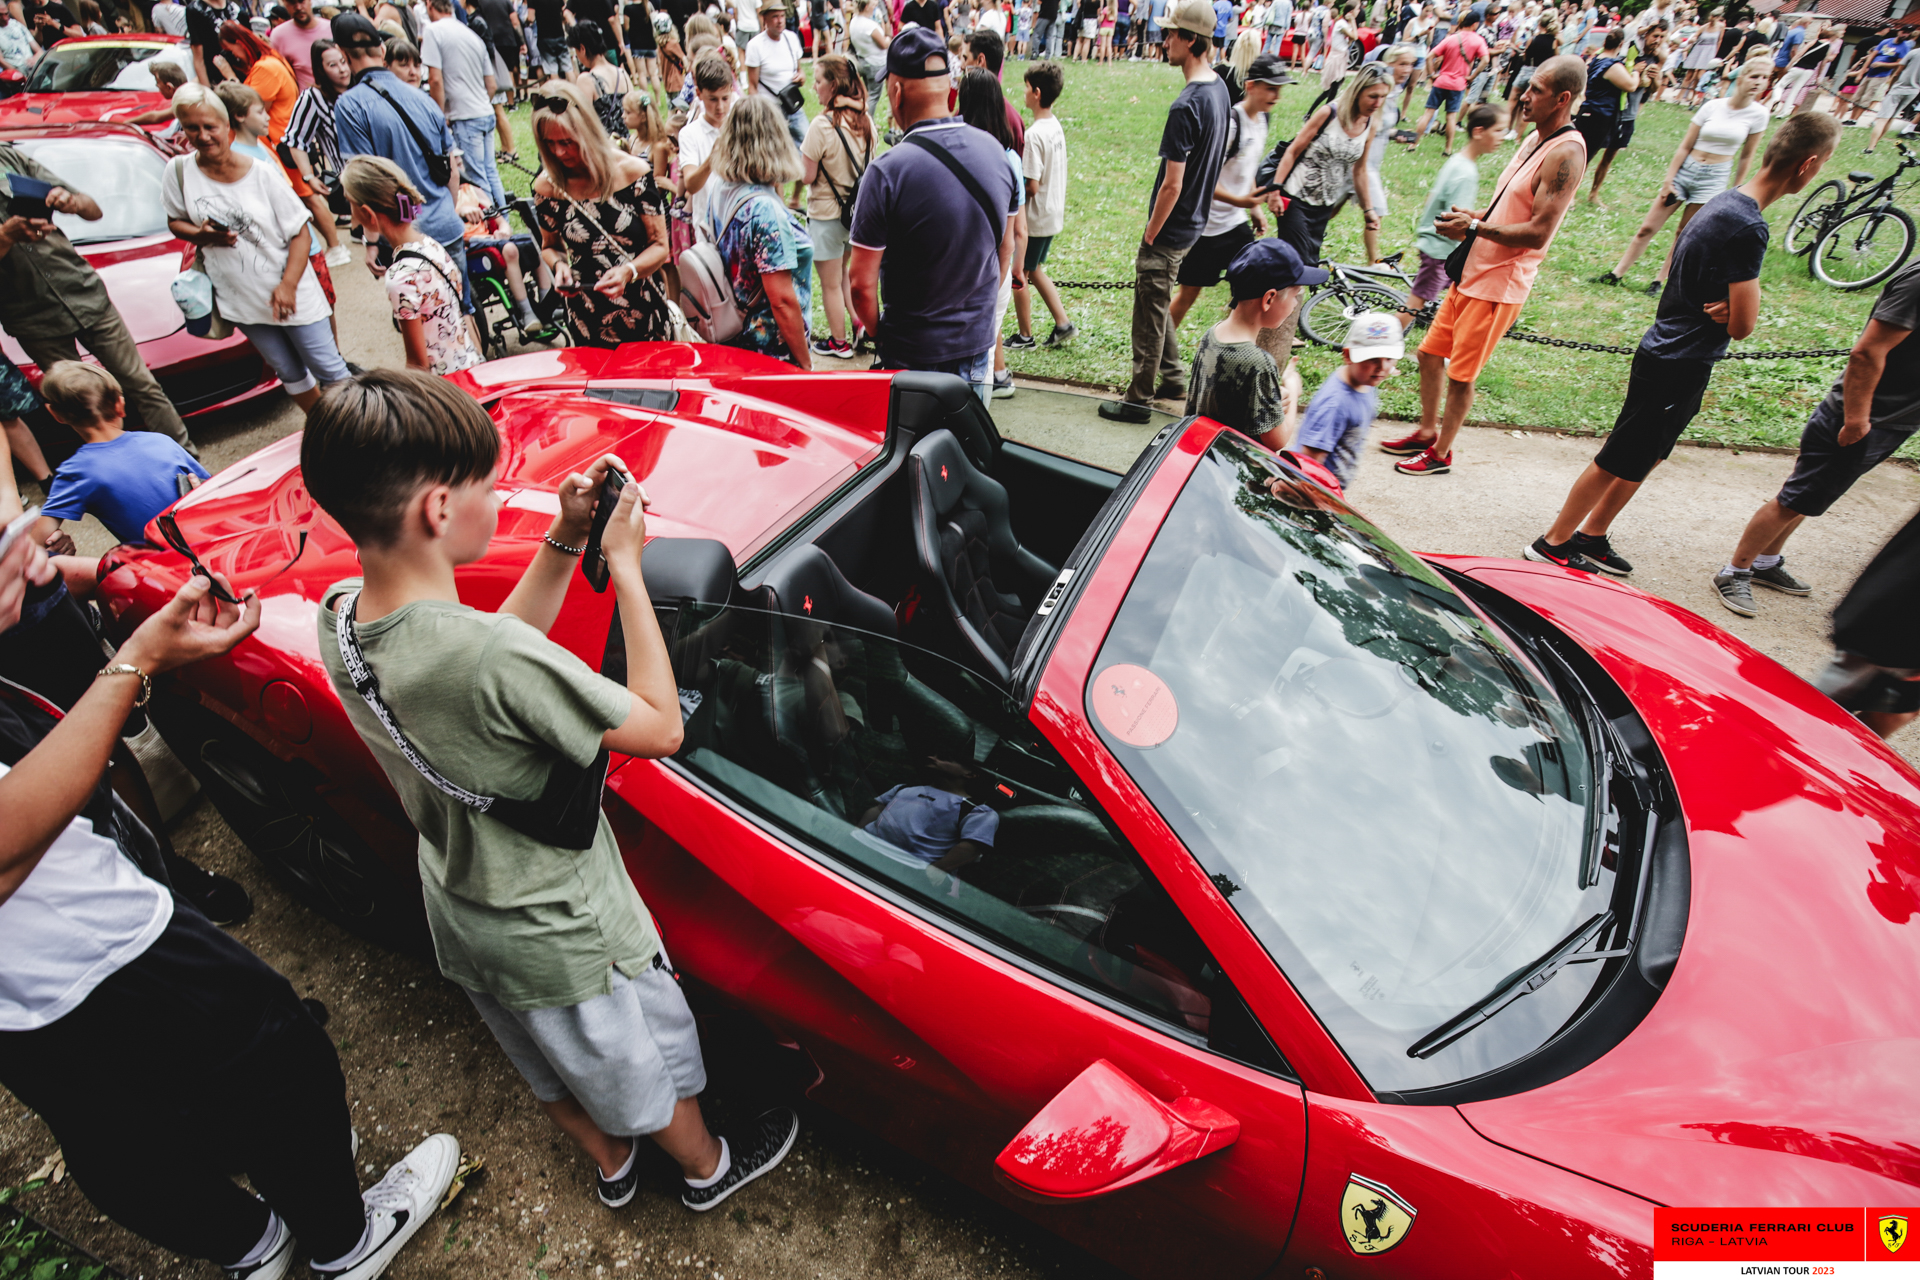 Cesis gathers in Pils Laukums to welcome the Ferrari tour with great affection.